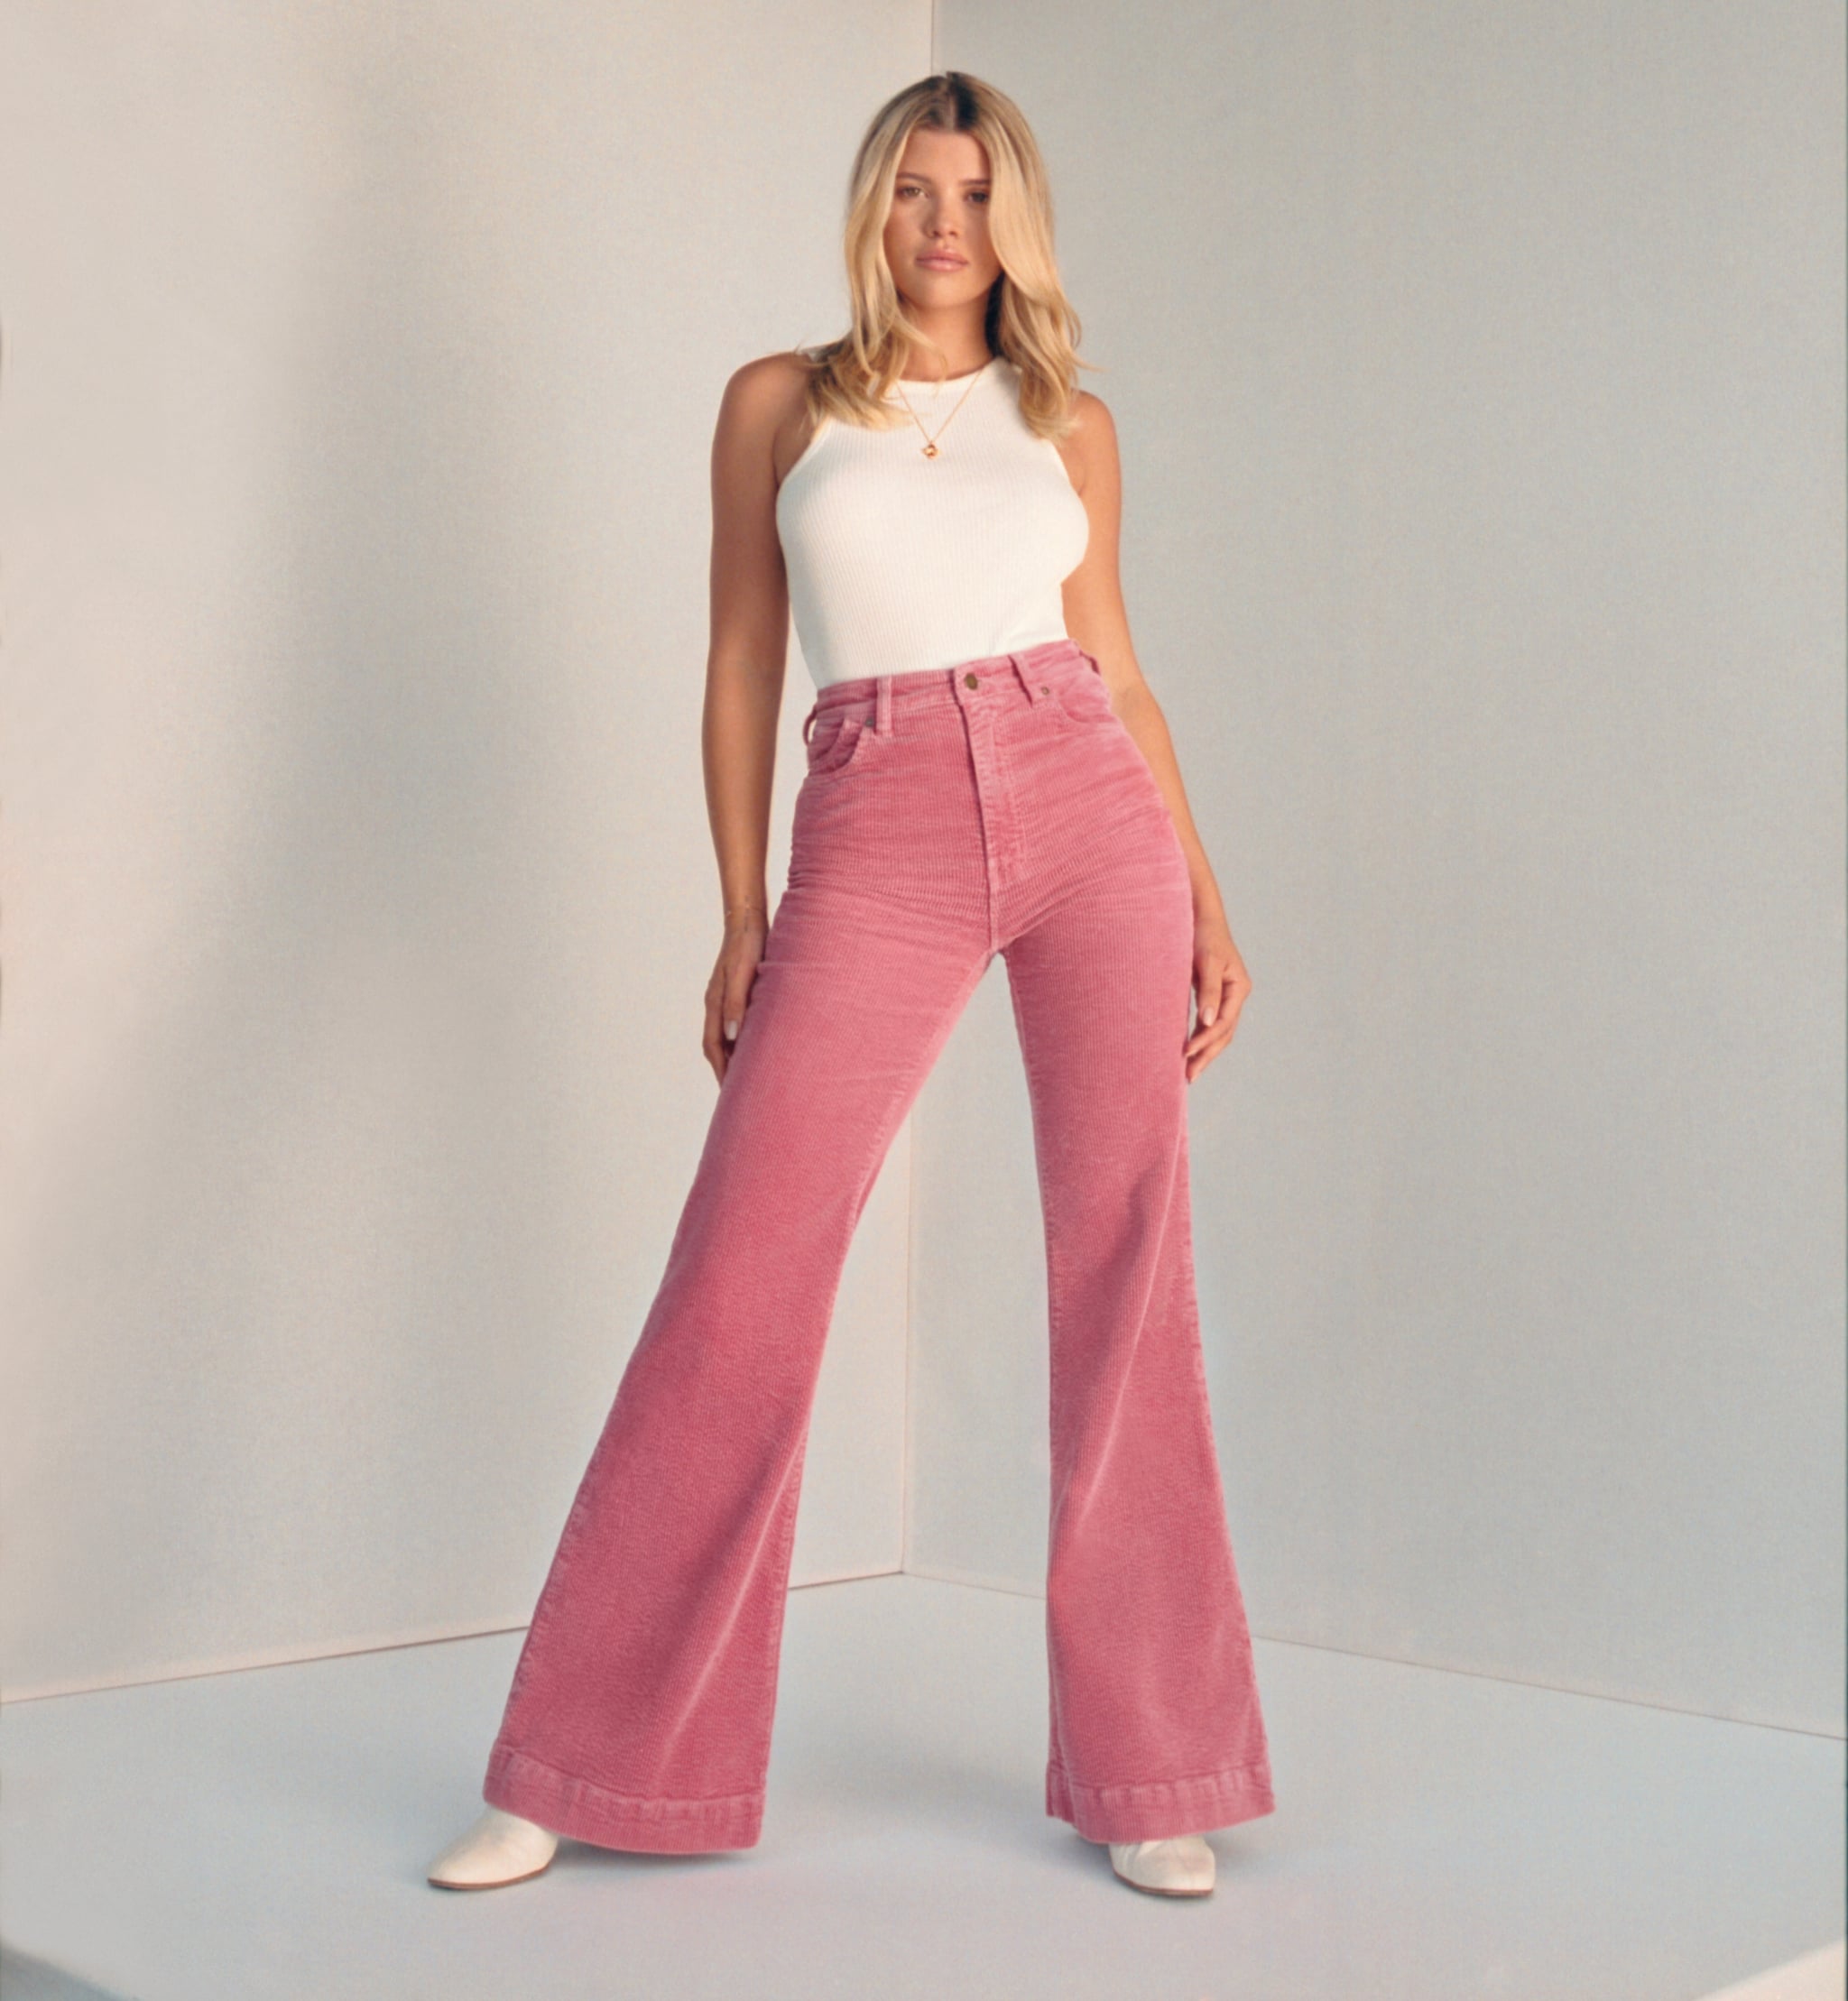 Sofia Richie x Rolla's Jeans Spring/Summer 2020 Collection